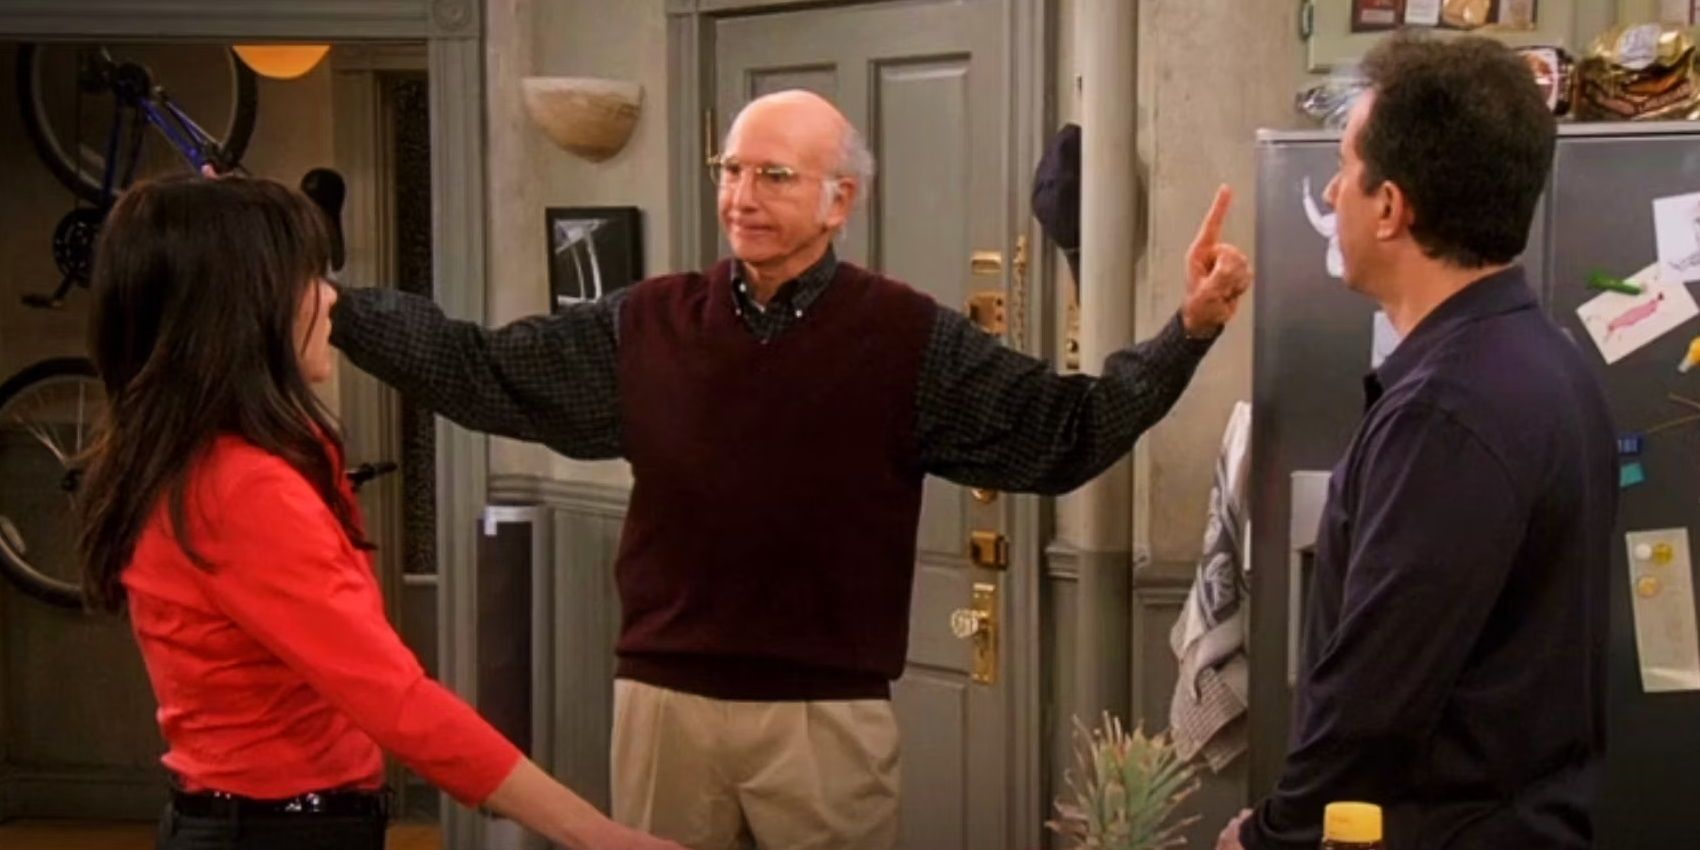 20 Best Curb Your Enthusiasm Episodes Of All Time, Ranked